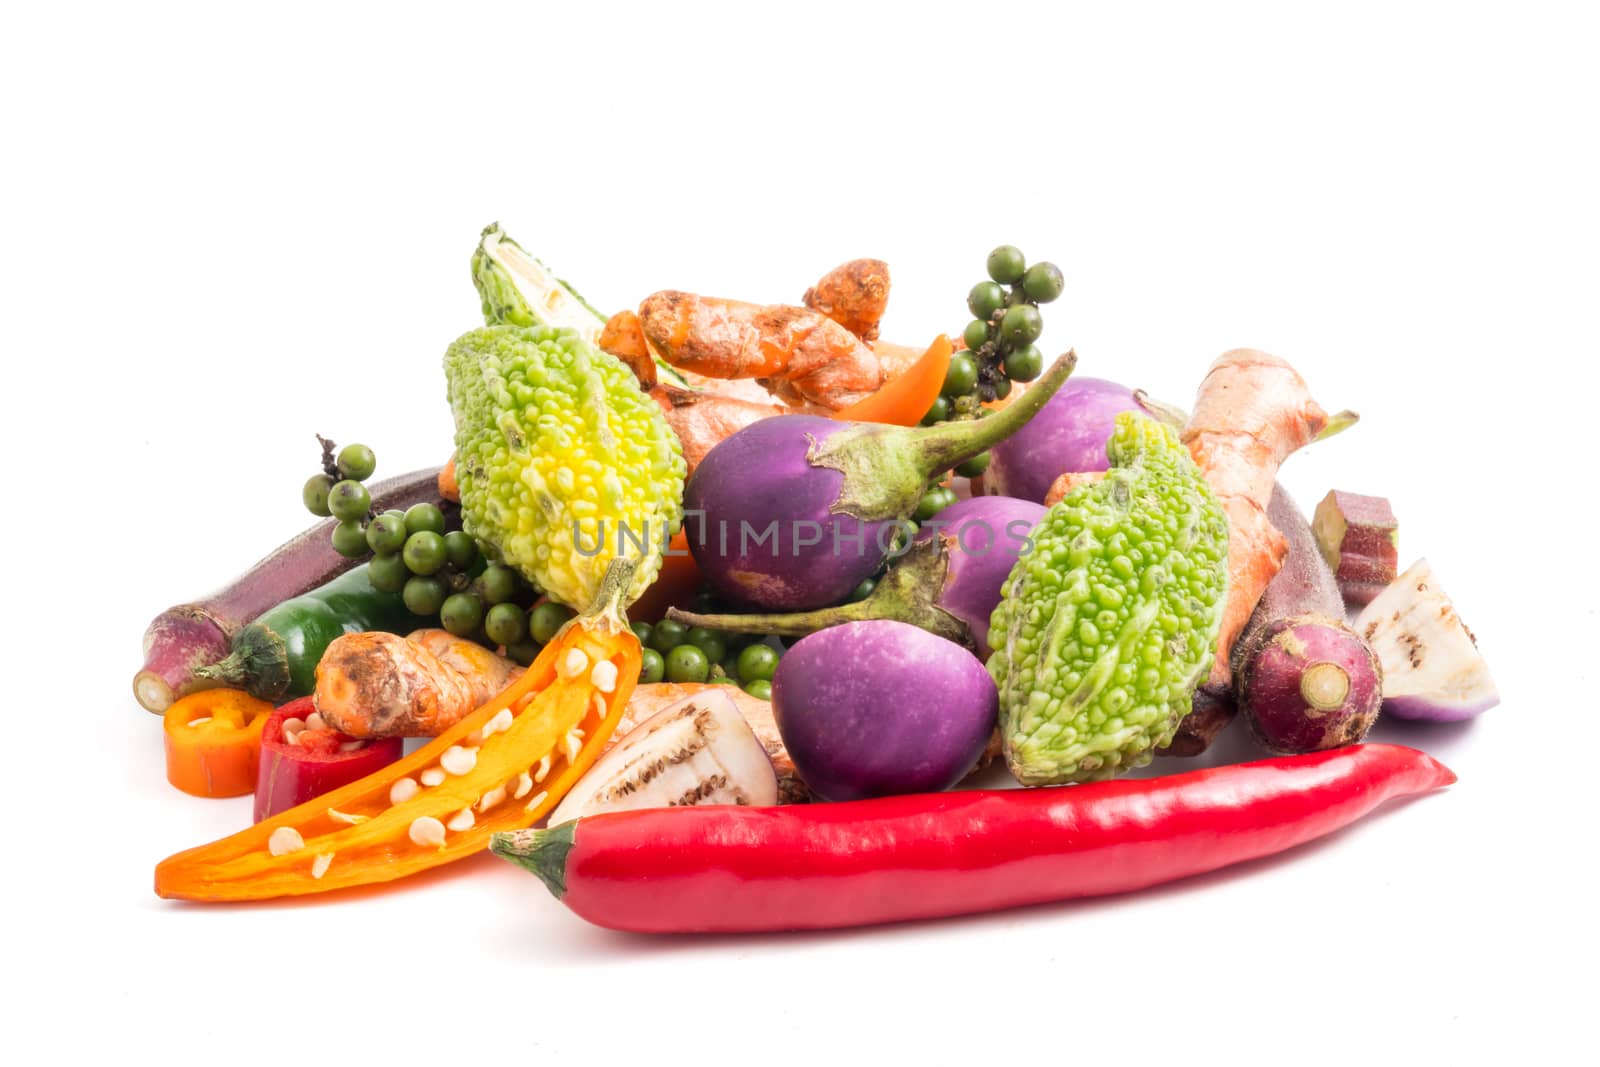 Group of fresh vegetables and herbs on white background.  by ronnarong